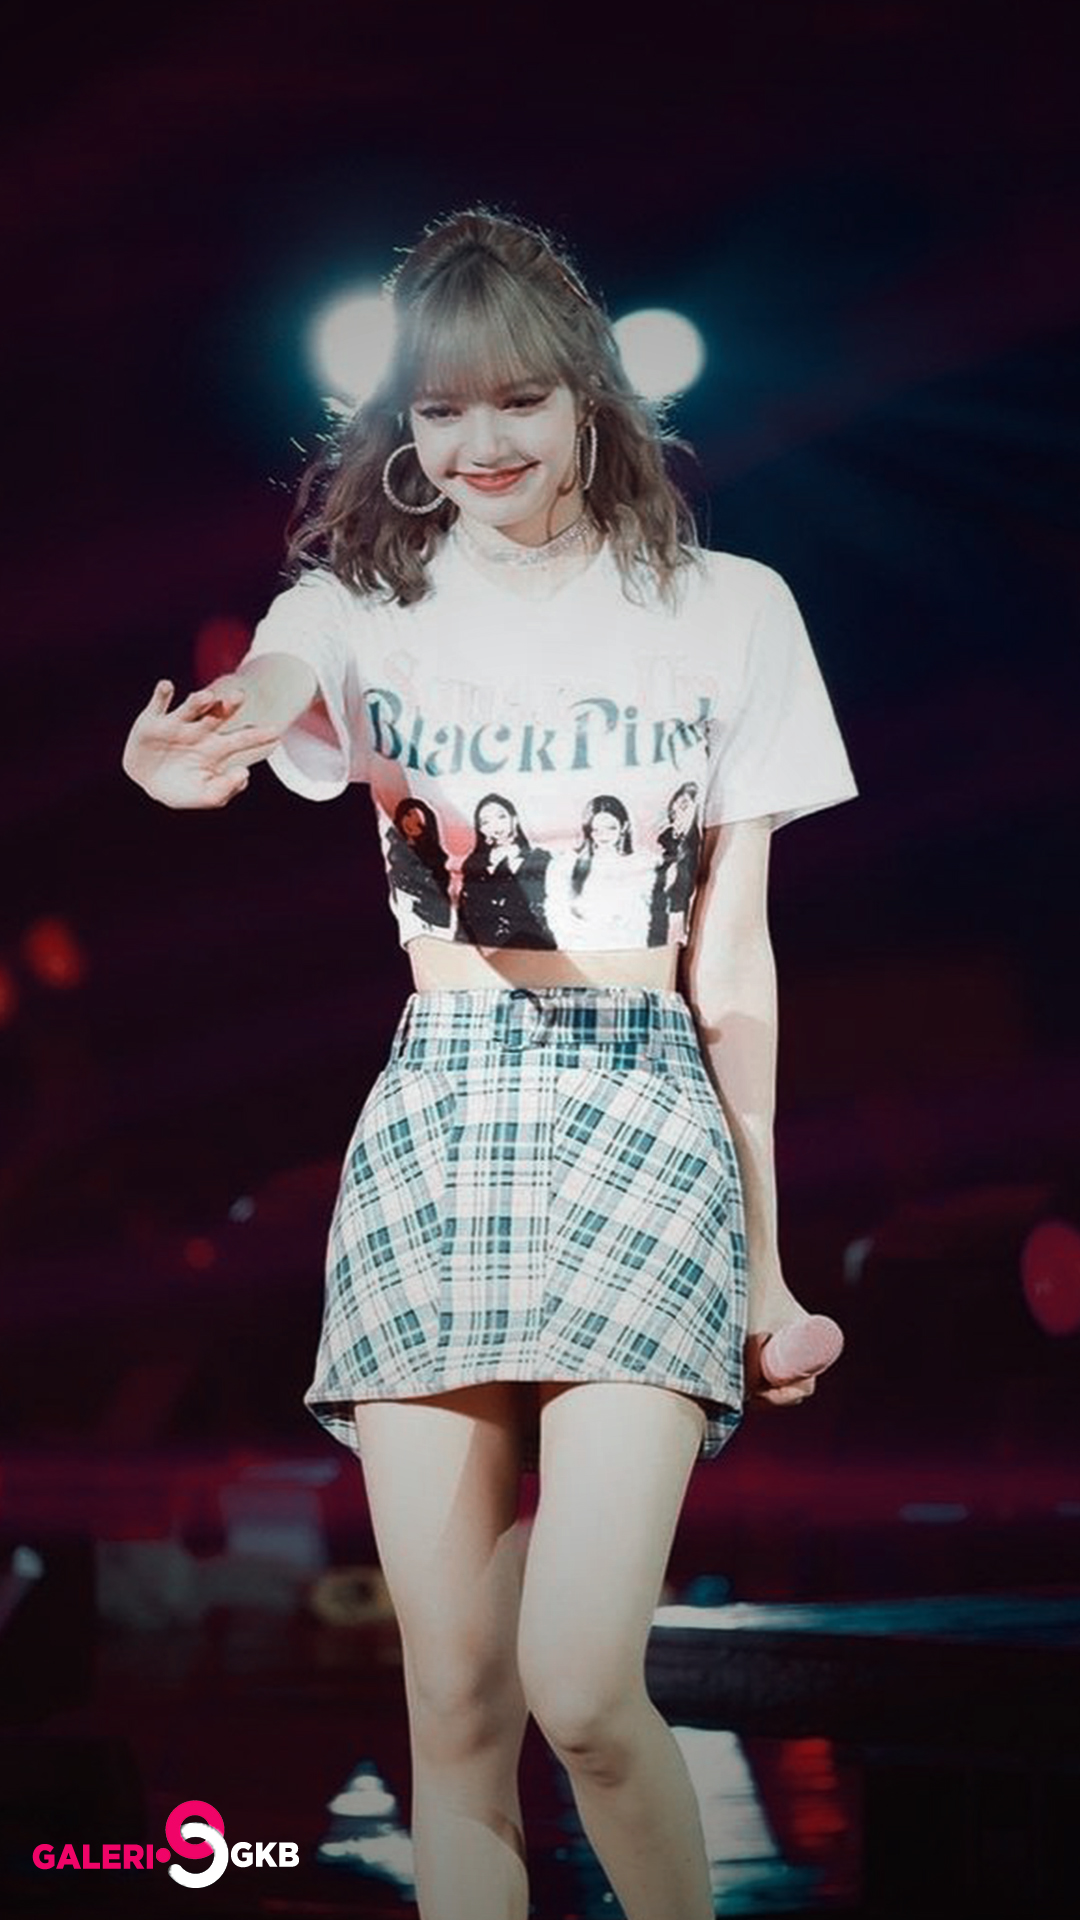 Lisa Blackpink Photo Wallpaper For iPhone and Android. Lalisa Blackpink Image